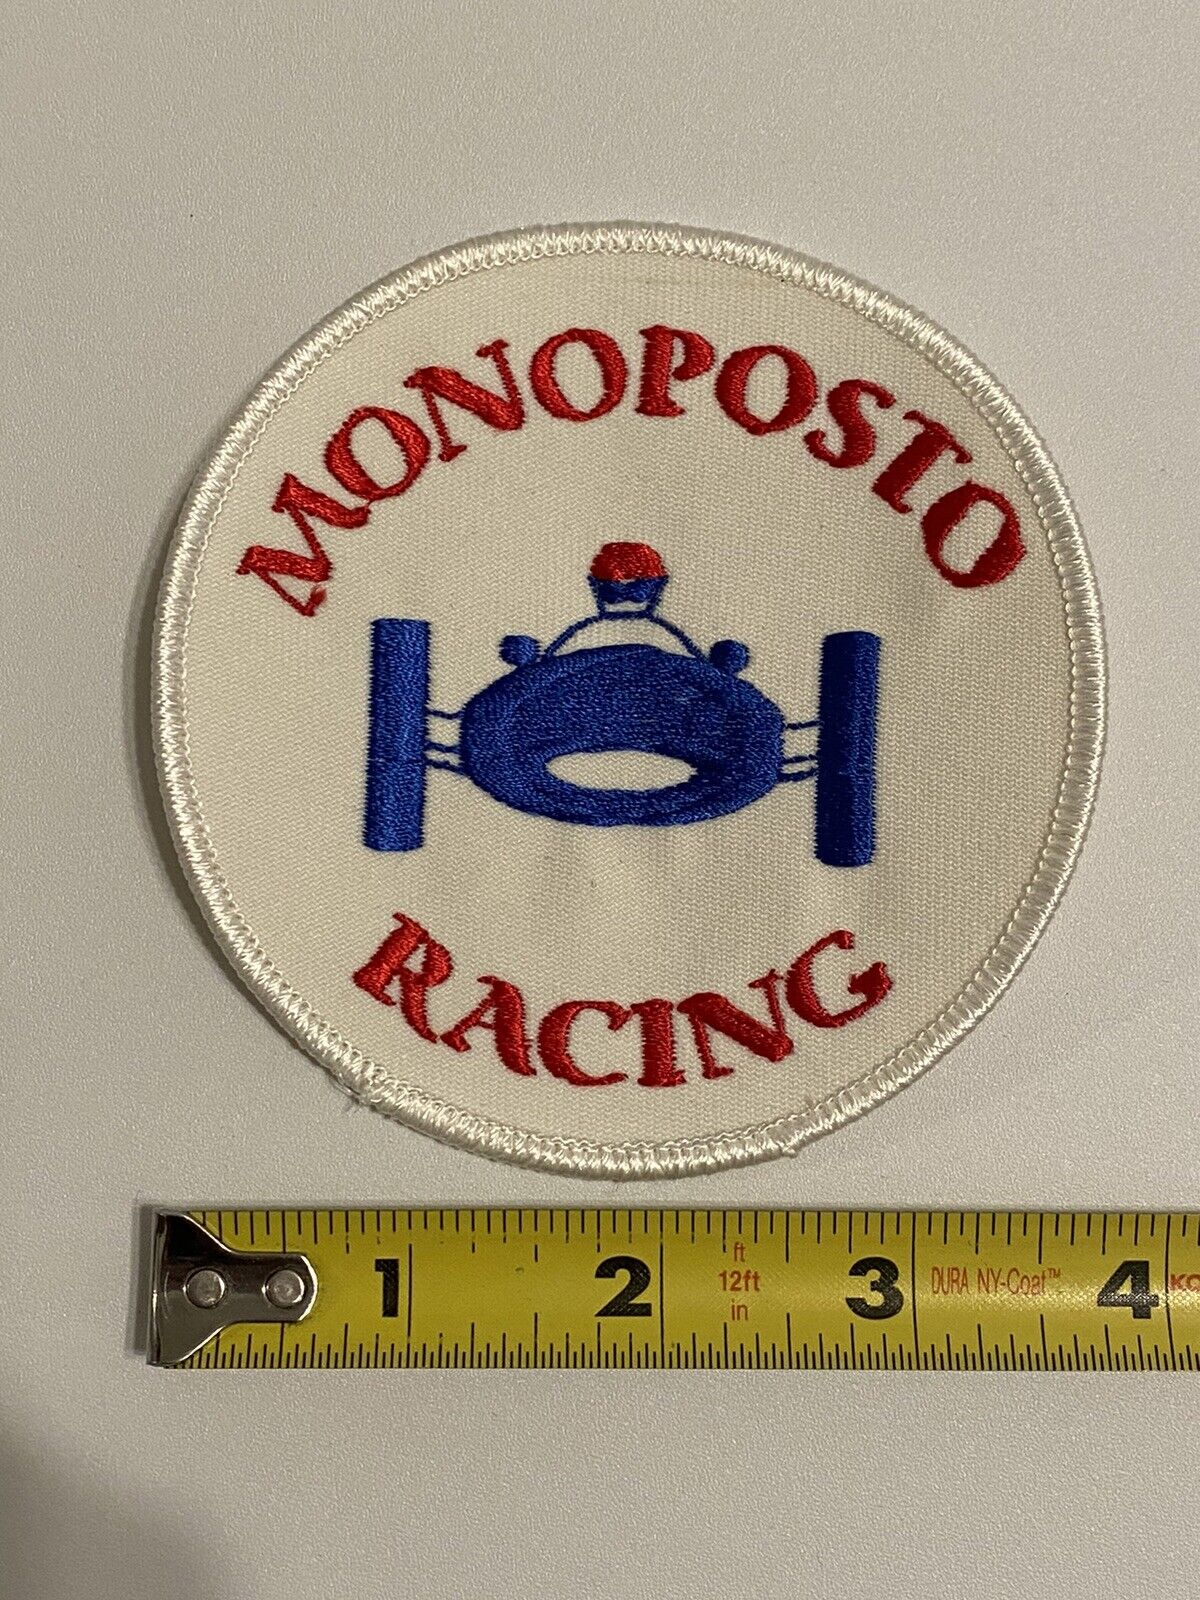 Monoposto Racing Vintage Embroidered Patch Red White Blue